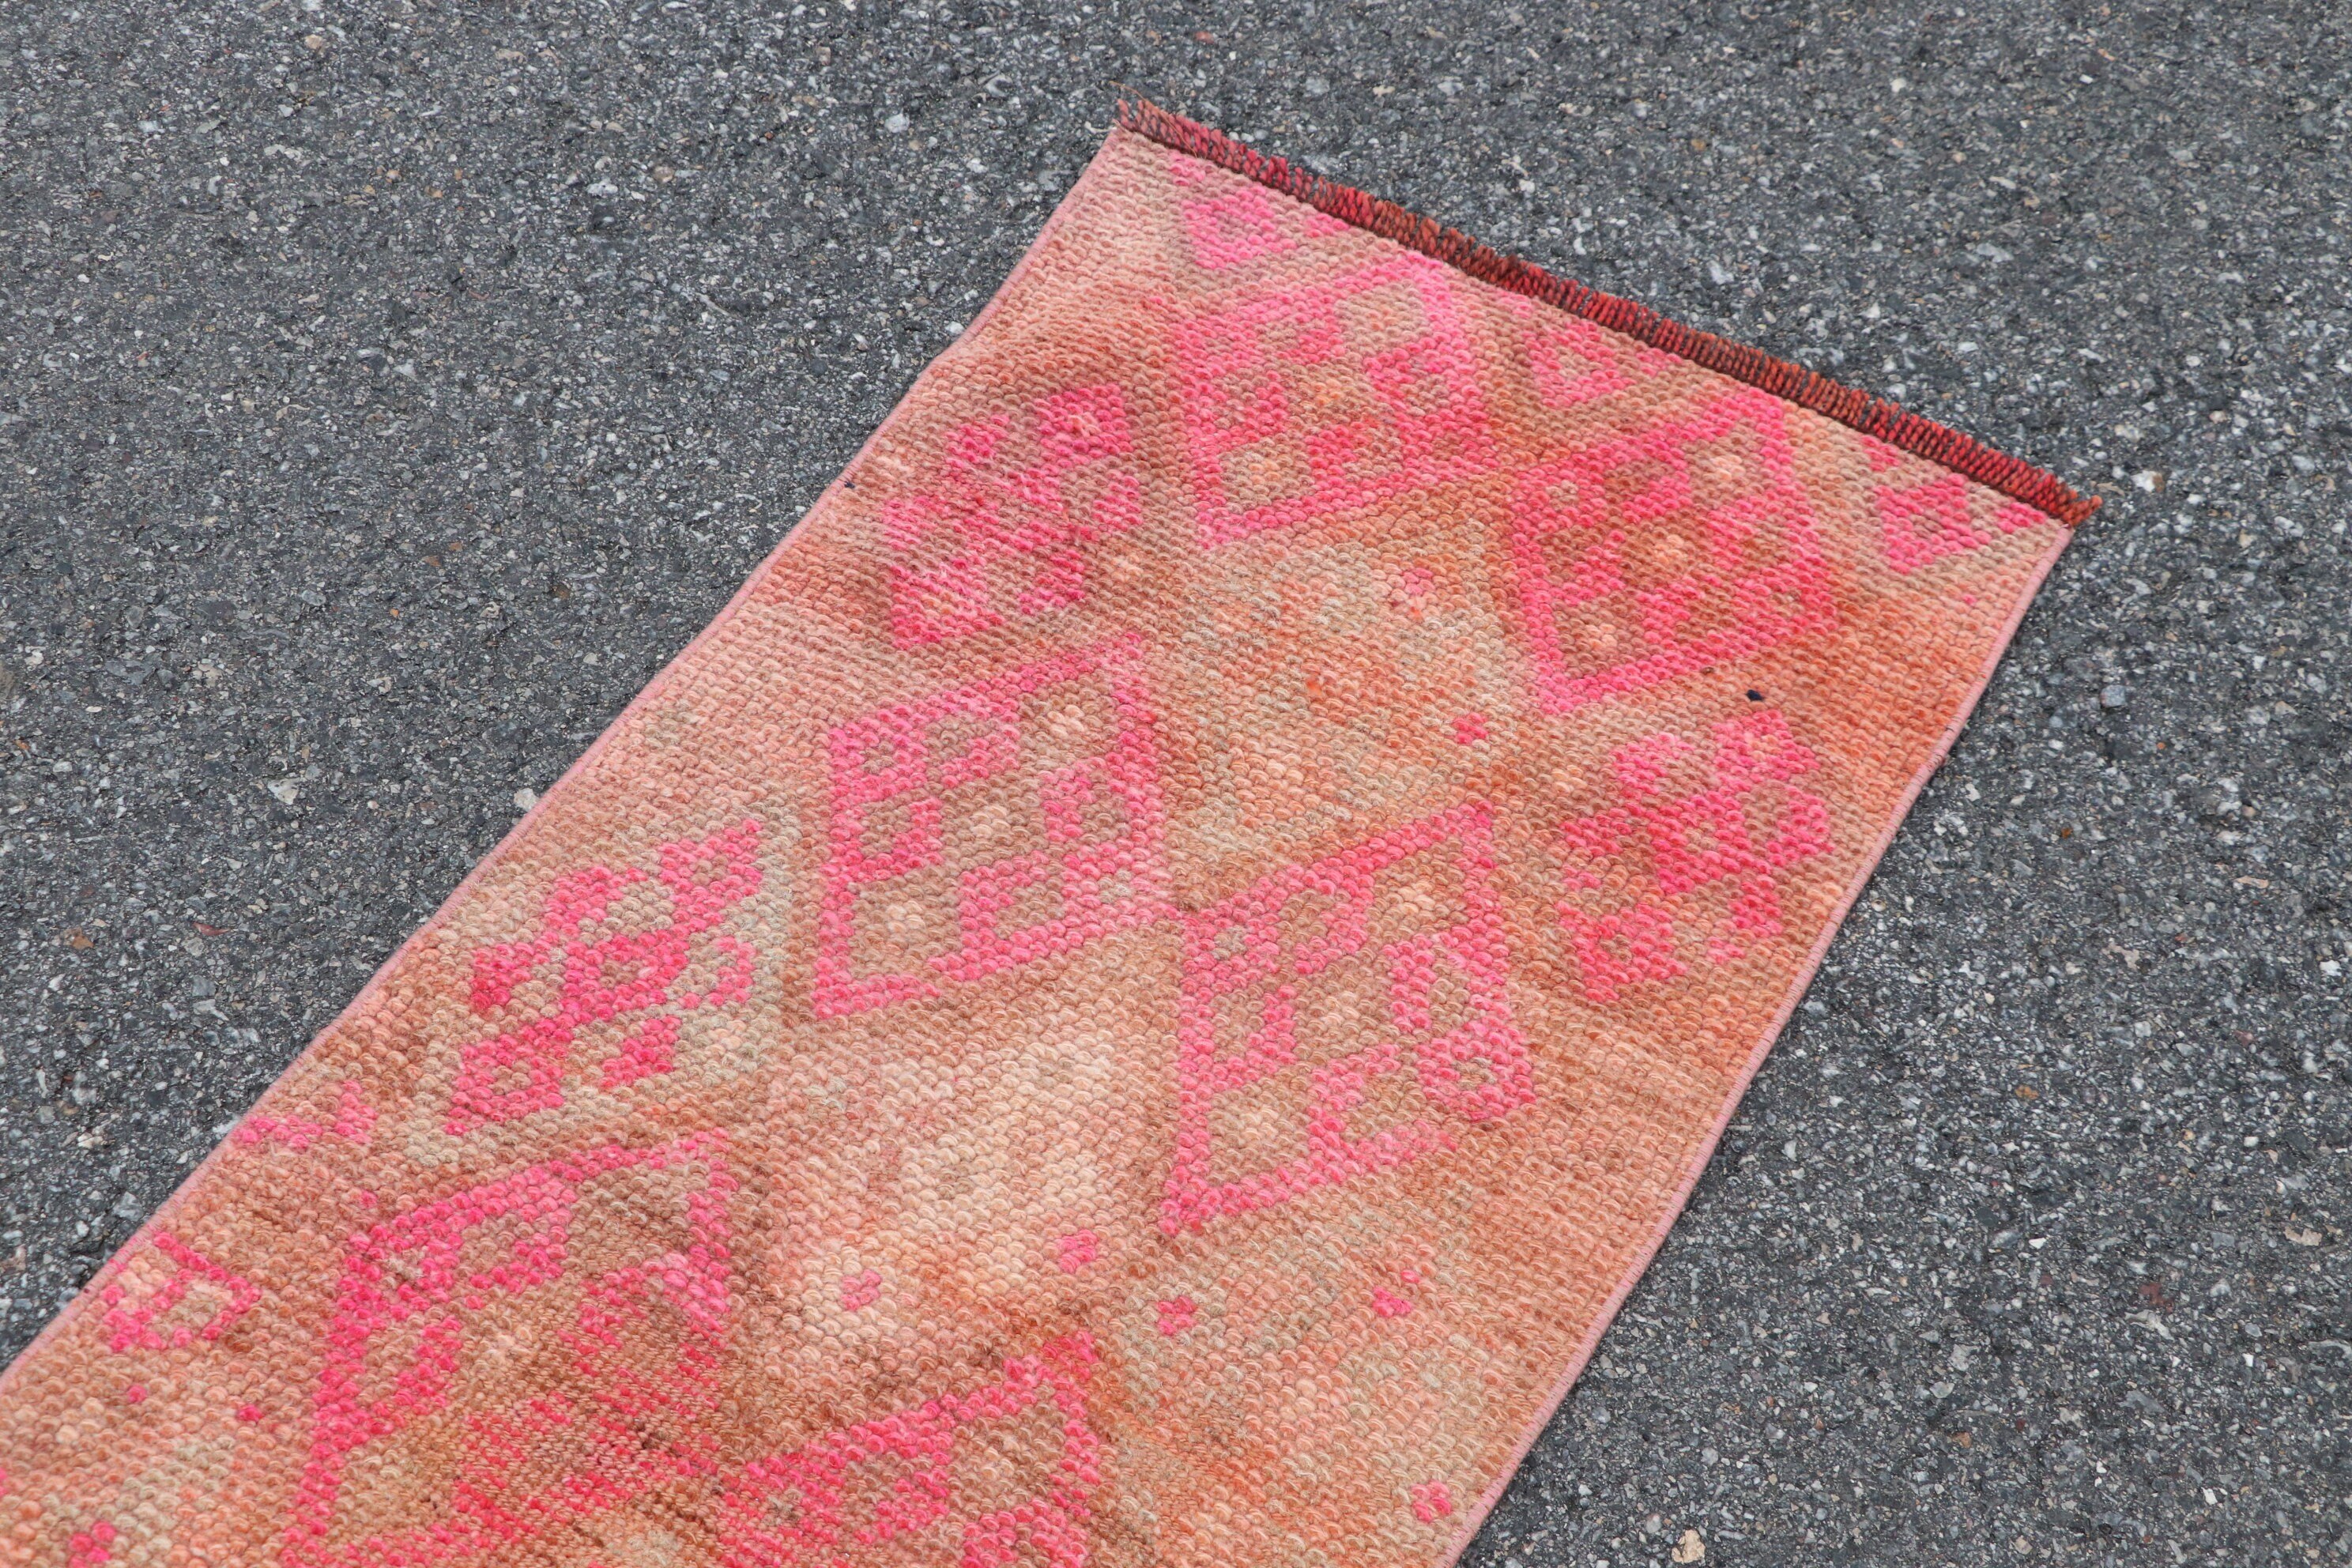 Pink Antique Rug, Vintage Rugs, Corridor Rug, 1.8x10.2 ft Runner Rugs, Rugs for Kitchen, Stair Rugs, Turkish Rug, Cool Rug, Home Decor Rug